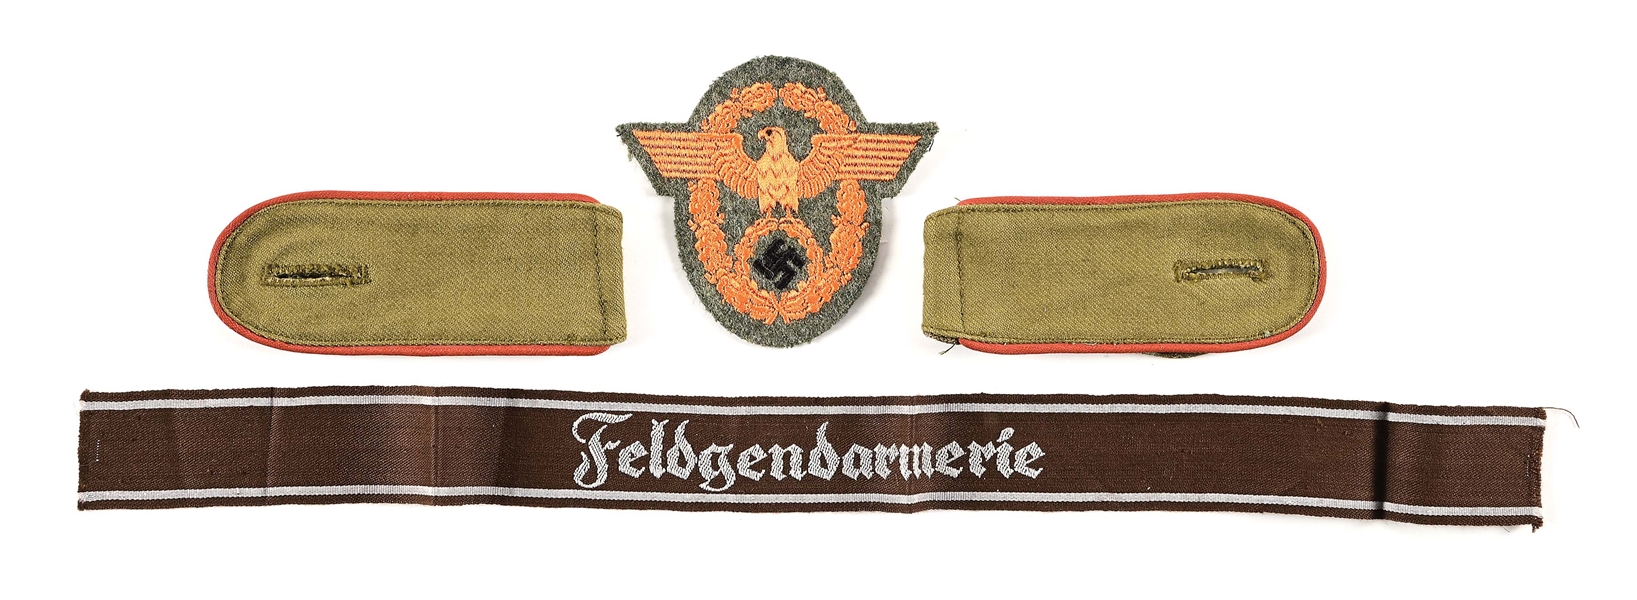 GERMAN WWII MATCHED PAIR OF HEER TROPICAL EM RECONAISSANCE SHOULDER STRAPS AND OTHER GERMAN WWII INSIGNIA.